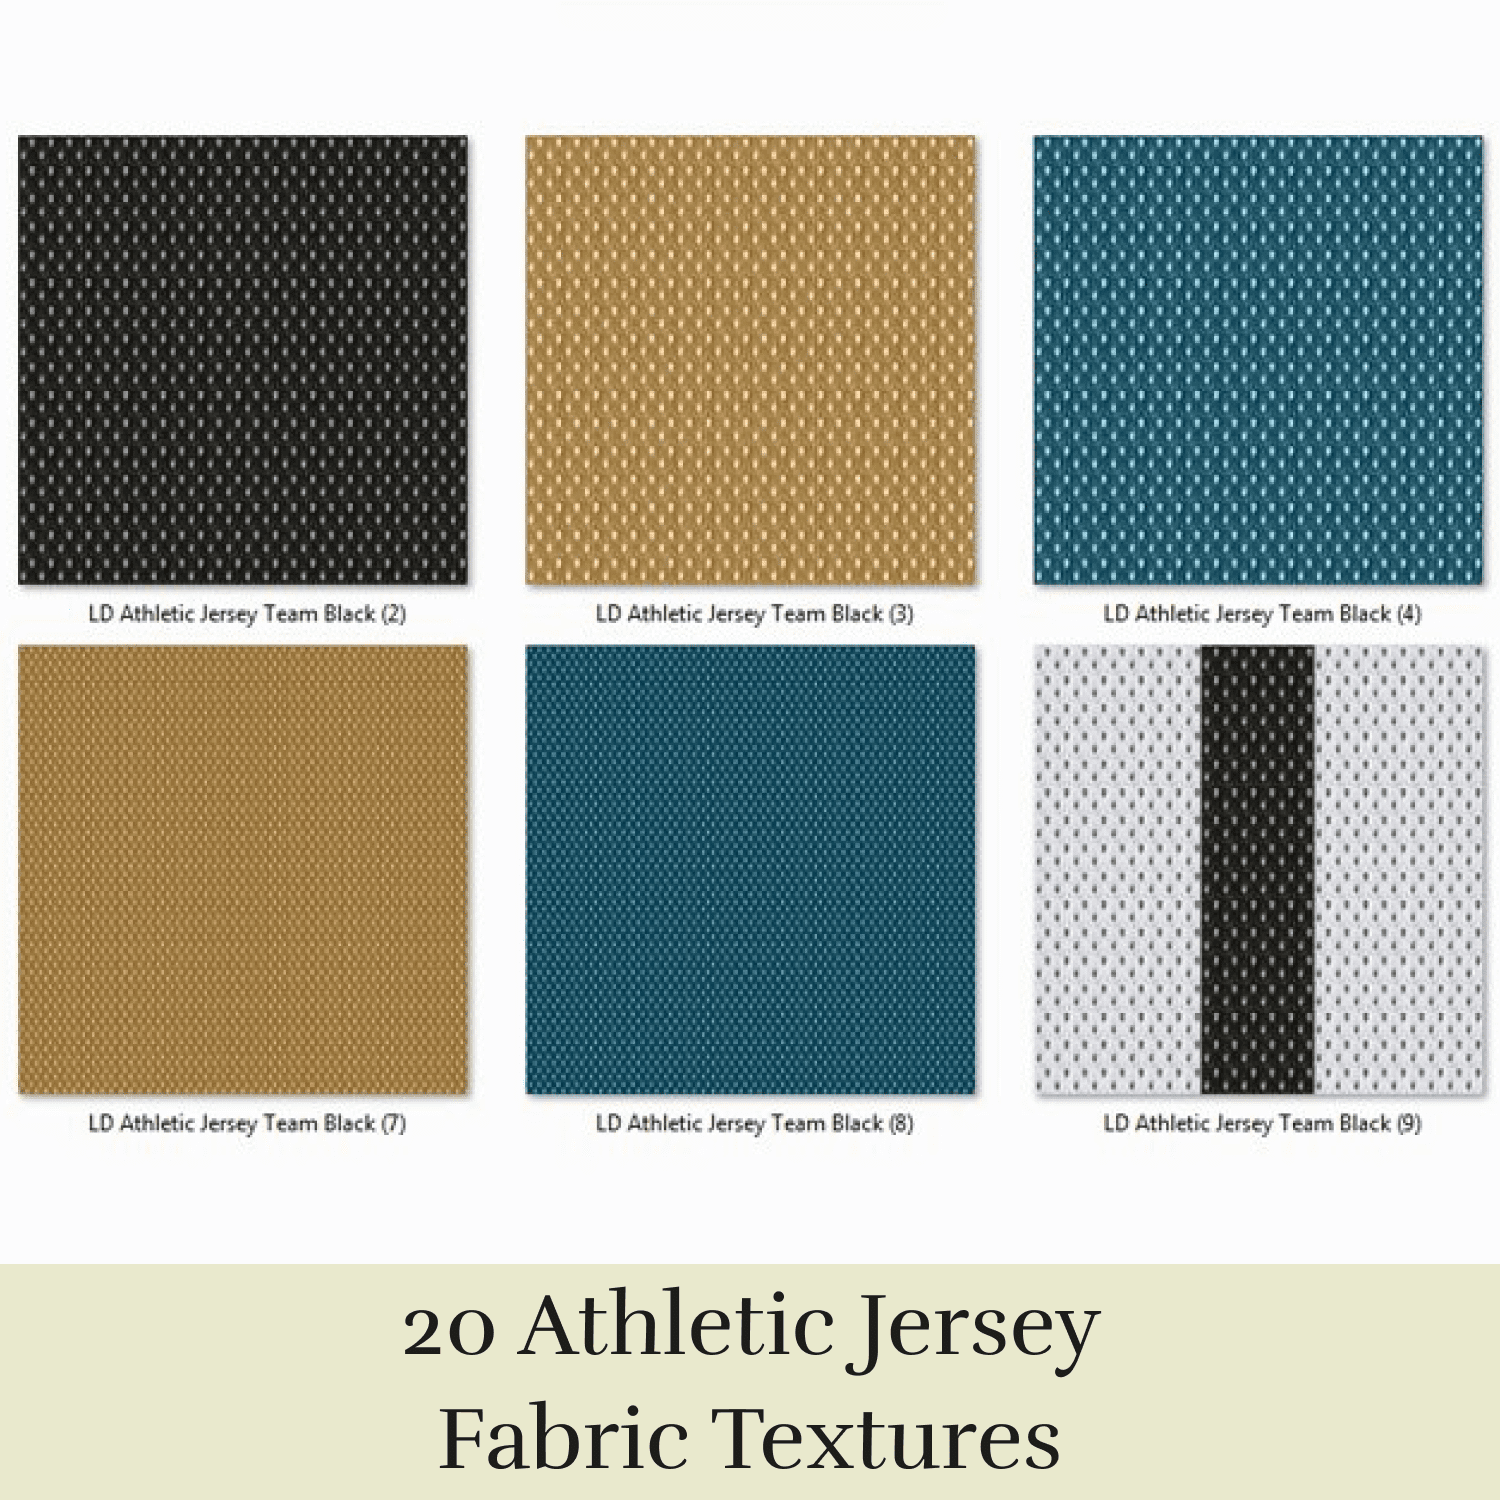 20 athletic jersey fabric textures cover.